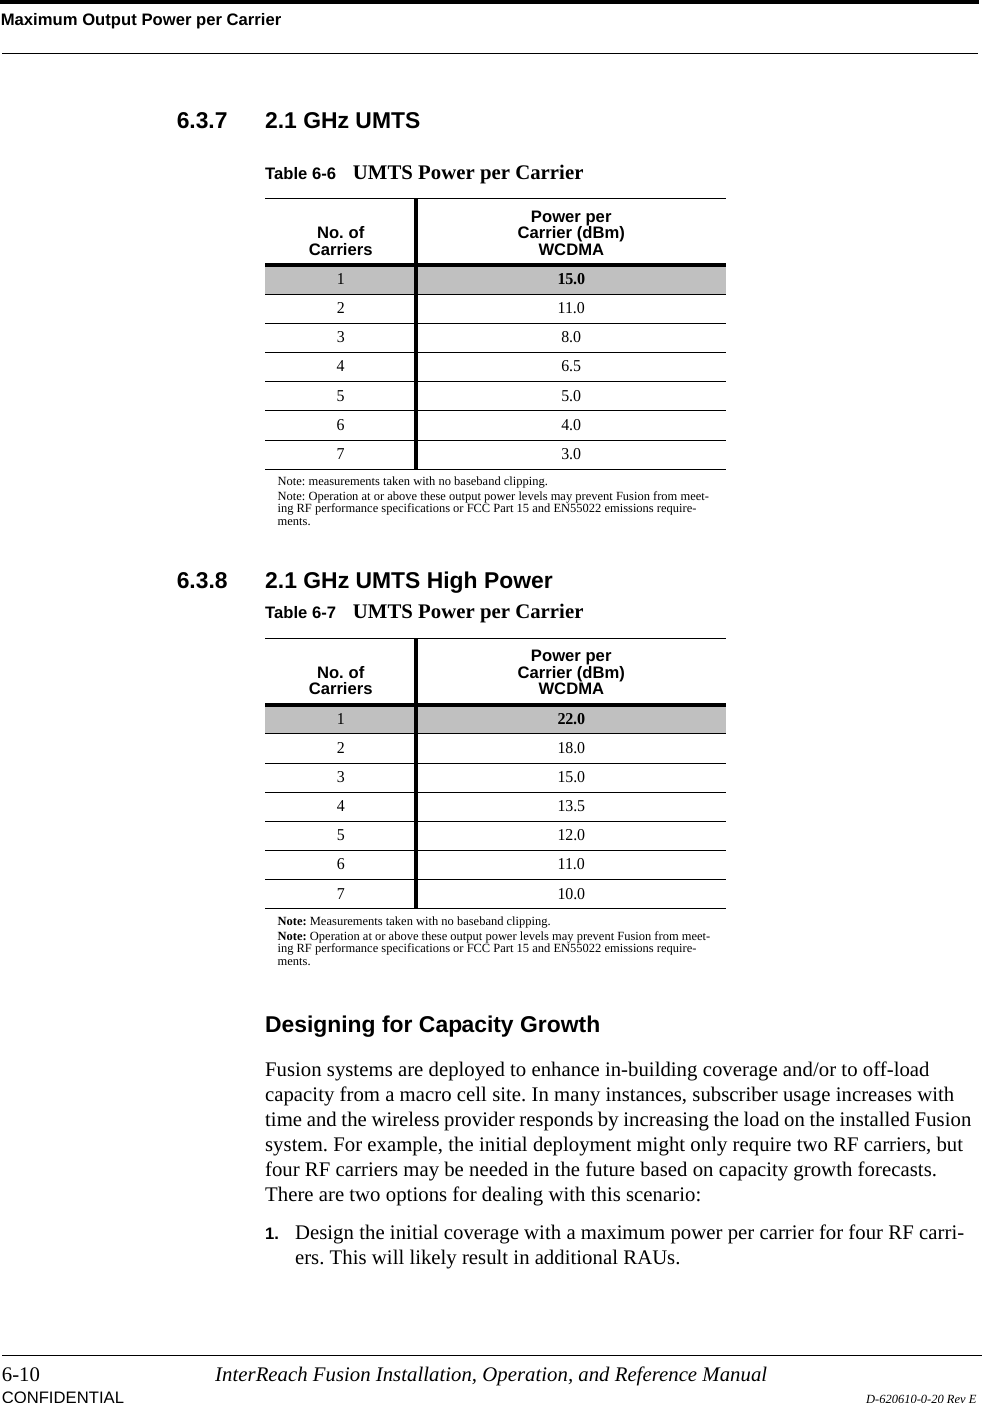 Maximum Output Power per Carrier6-10 InterReach Fusion Installation, Operation, and Reference ManualCONFIDENTIAL D-620610-0-20 Rev E6.3.7 2.1 GHz UMTS6.3.8 2.1 GHz UMTS High PowerDesigning for Capacity GrowthFusion systems are deployed to enhance in-building coverage and/or to off-load capacity from a macro cell site. In many instances, subscriber usage increases with time and the wireless provider responds by increasing the load on the installed Fusion system. For example, the initial deployment might only require two RF carriers, but four RF carriers may be needed in the future based on capacity growth forecasts.   There are two options for dealing with this scenario:1. Design the initial coverage with a maximum power per carrier for four RF carri-ers. This will likely result in additional RAUs.Table 6-6 UMTS Power per CarrierNo. ofCarriersPower per Carrier (dBm)WCDMA115.0211.038.046.555.064.073.0Note: measurements taken with no baseband clipping.Note: Operation at or above these output power levels may prevent Fusion from meet-ing RF performance specifications or FCC Part 15 and EN55022 emissions require-ments. Table 6-7 UMTS Power per CarrierNo. ofCarriersPower per Carrier (dBm)WCDMA122.02 18.03 15.04 13.55 12.0611.07 10.0Note: Measurements taken with no baseband clipping.Note: Operation at or above these output power levels may prevent Fusion from meet-ing RF performance specifications or FCC Part 15 and EN55022 emissions require-ments. 